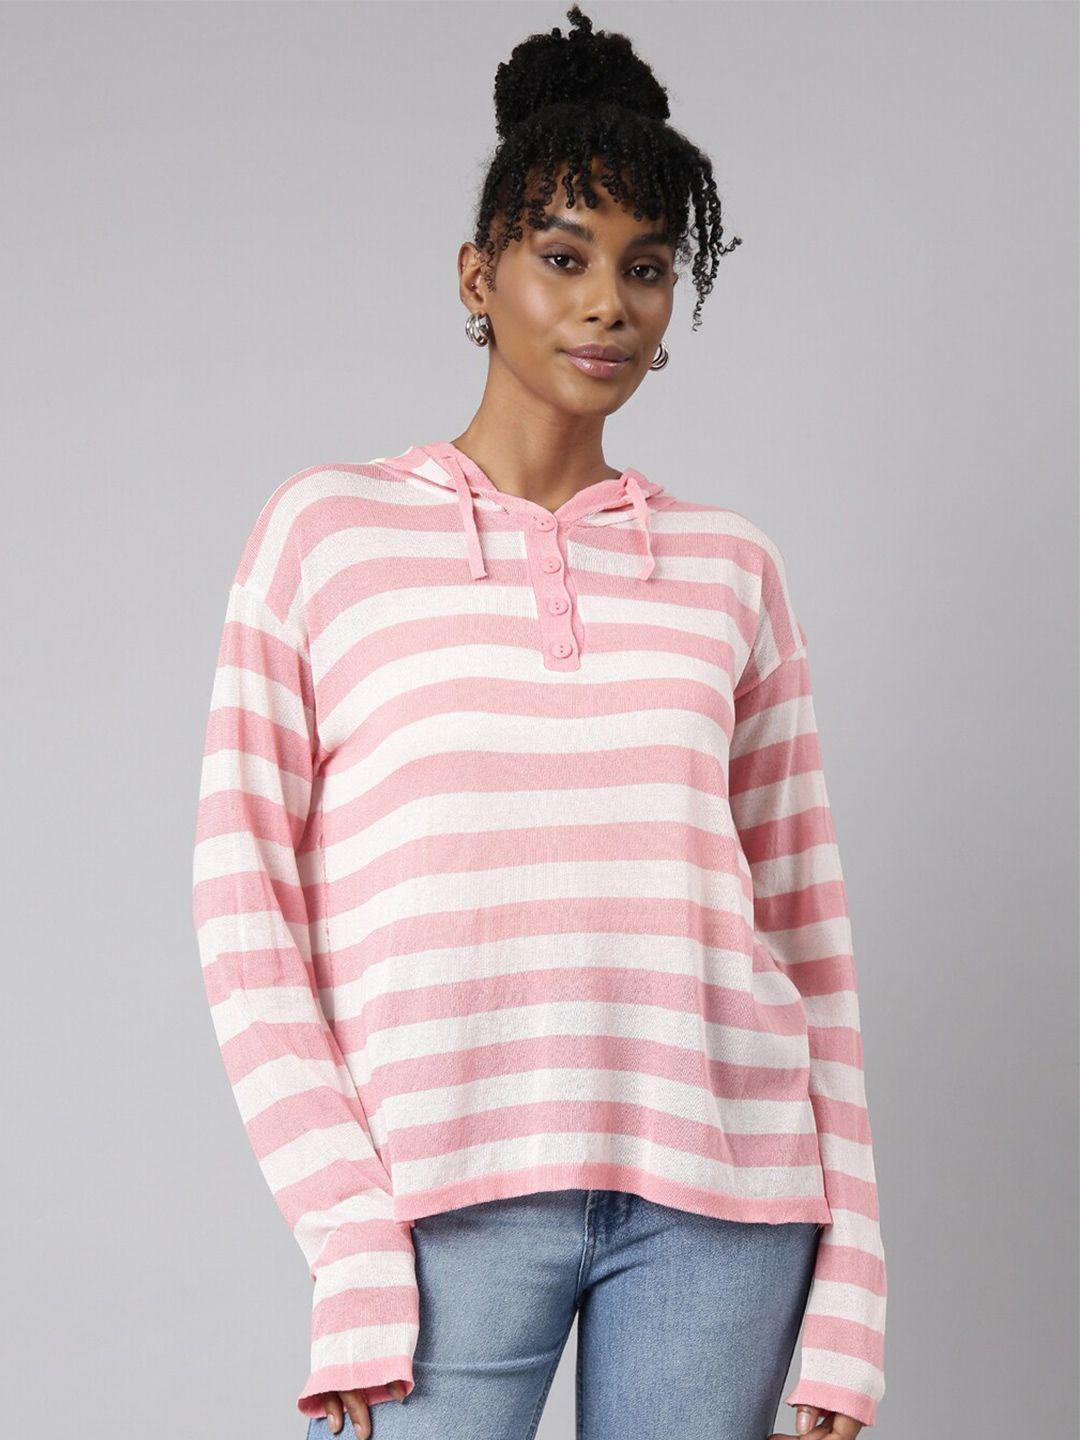 showoff-long-sleeves-striped-hood-shirt-style-top